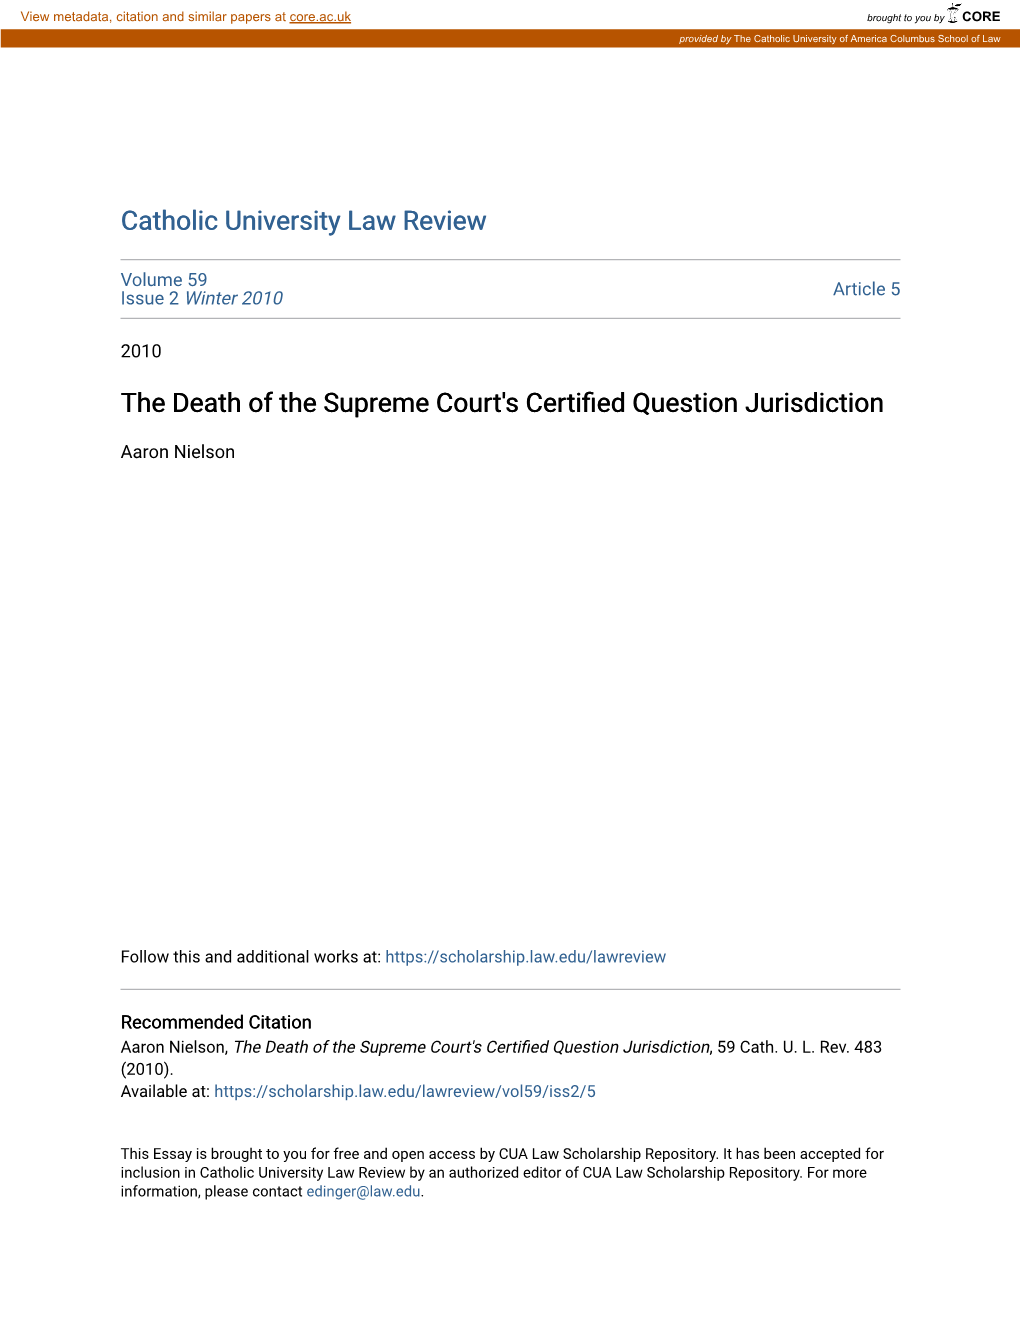 The Death of the Supreme Court's Certified Question Jurisdiction